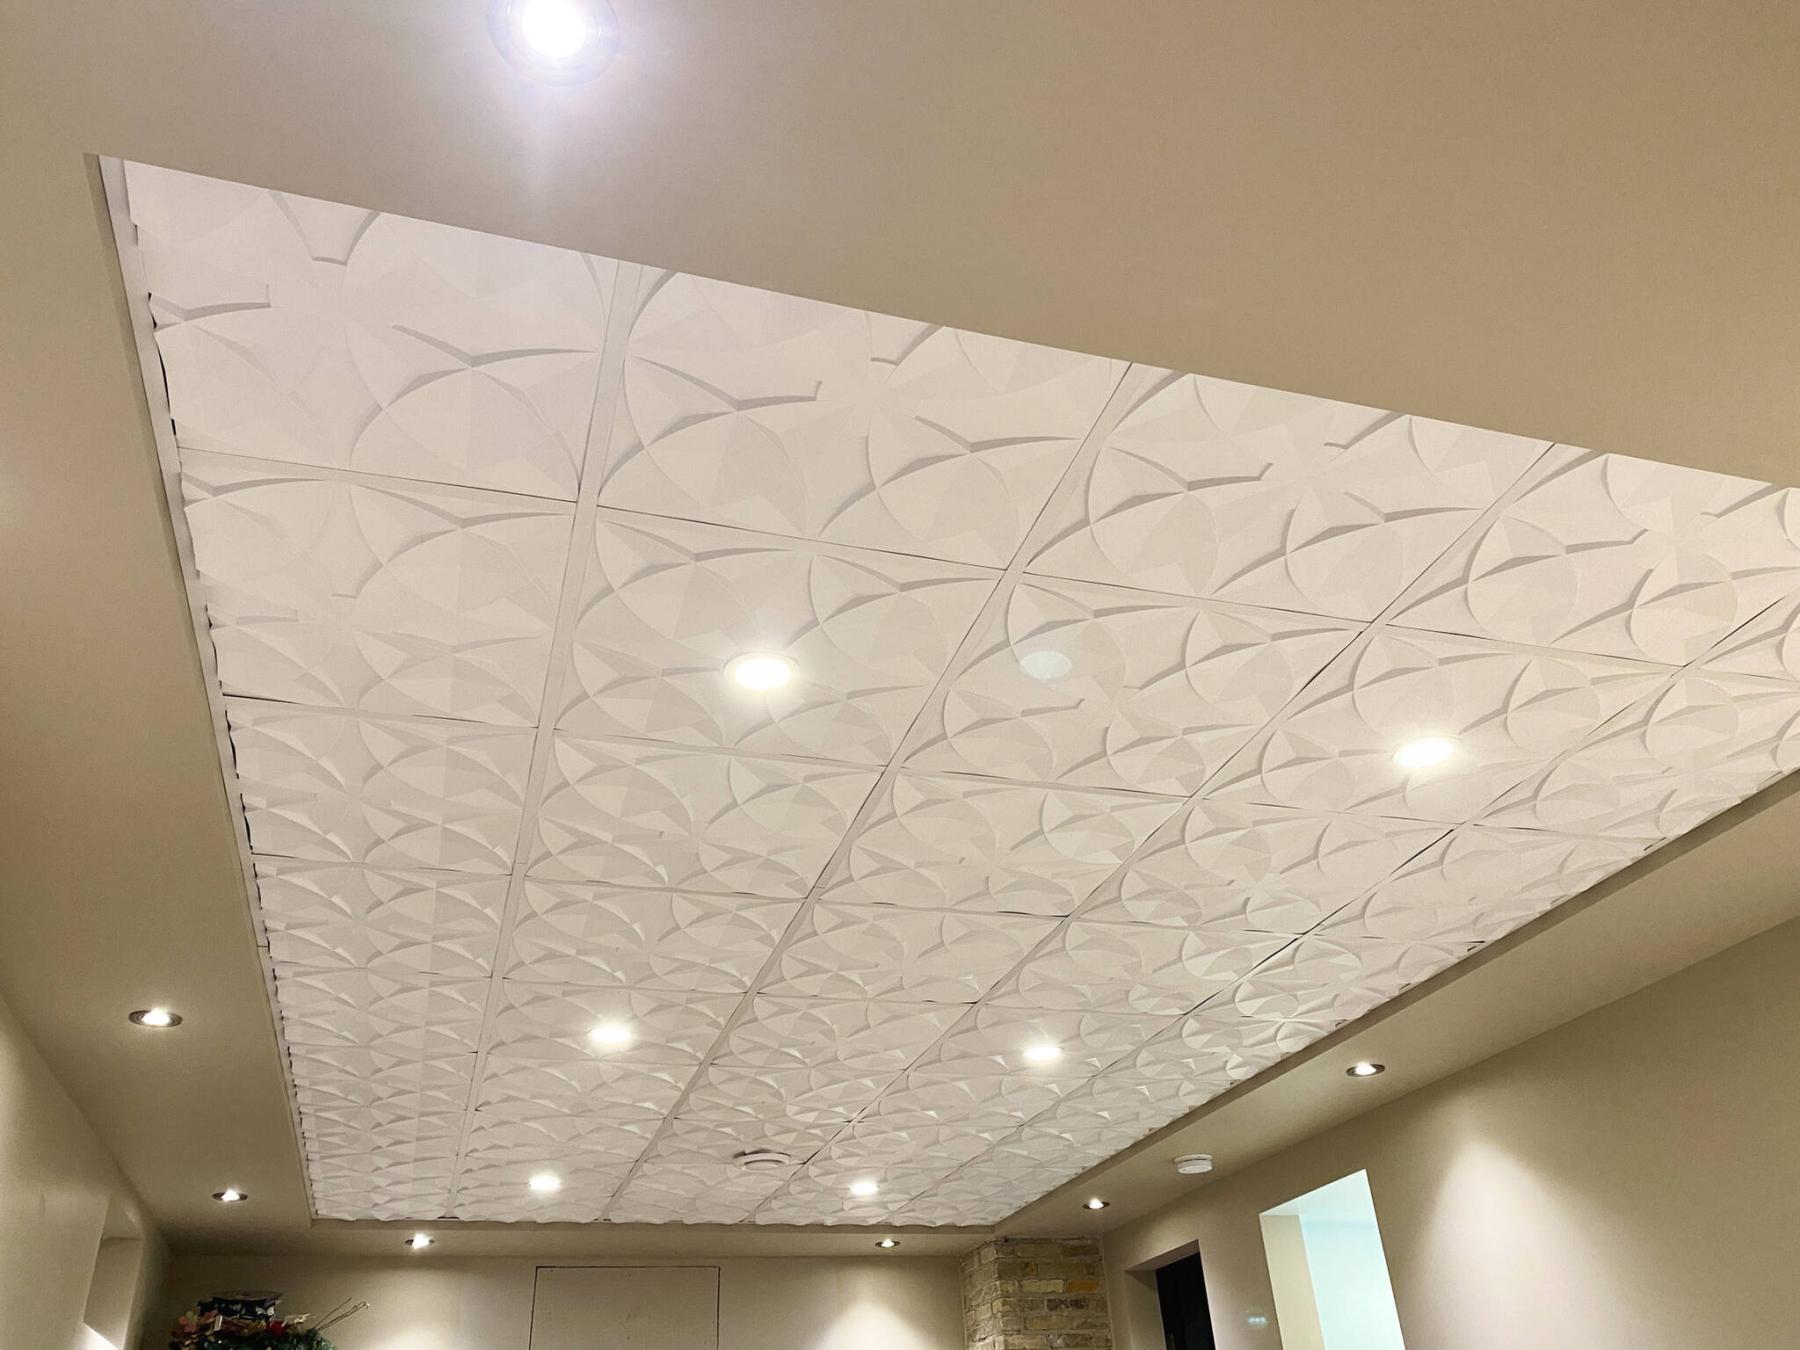  <p>Photos by Marc LaBossiere / Free Press</p>
                                <p>Decorative two-by-two-foot PVC tiles are set into position within the main grid of the suspended ceiling.</p> 